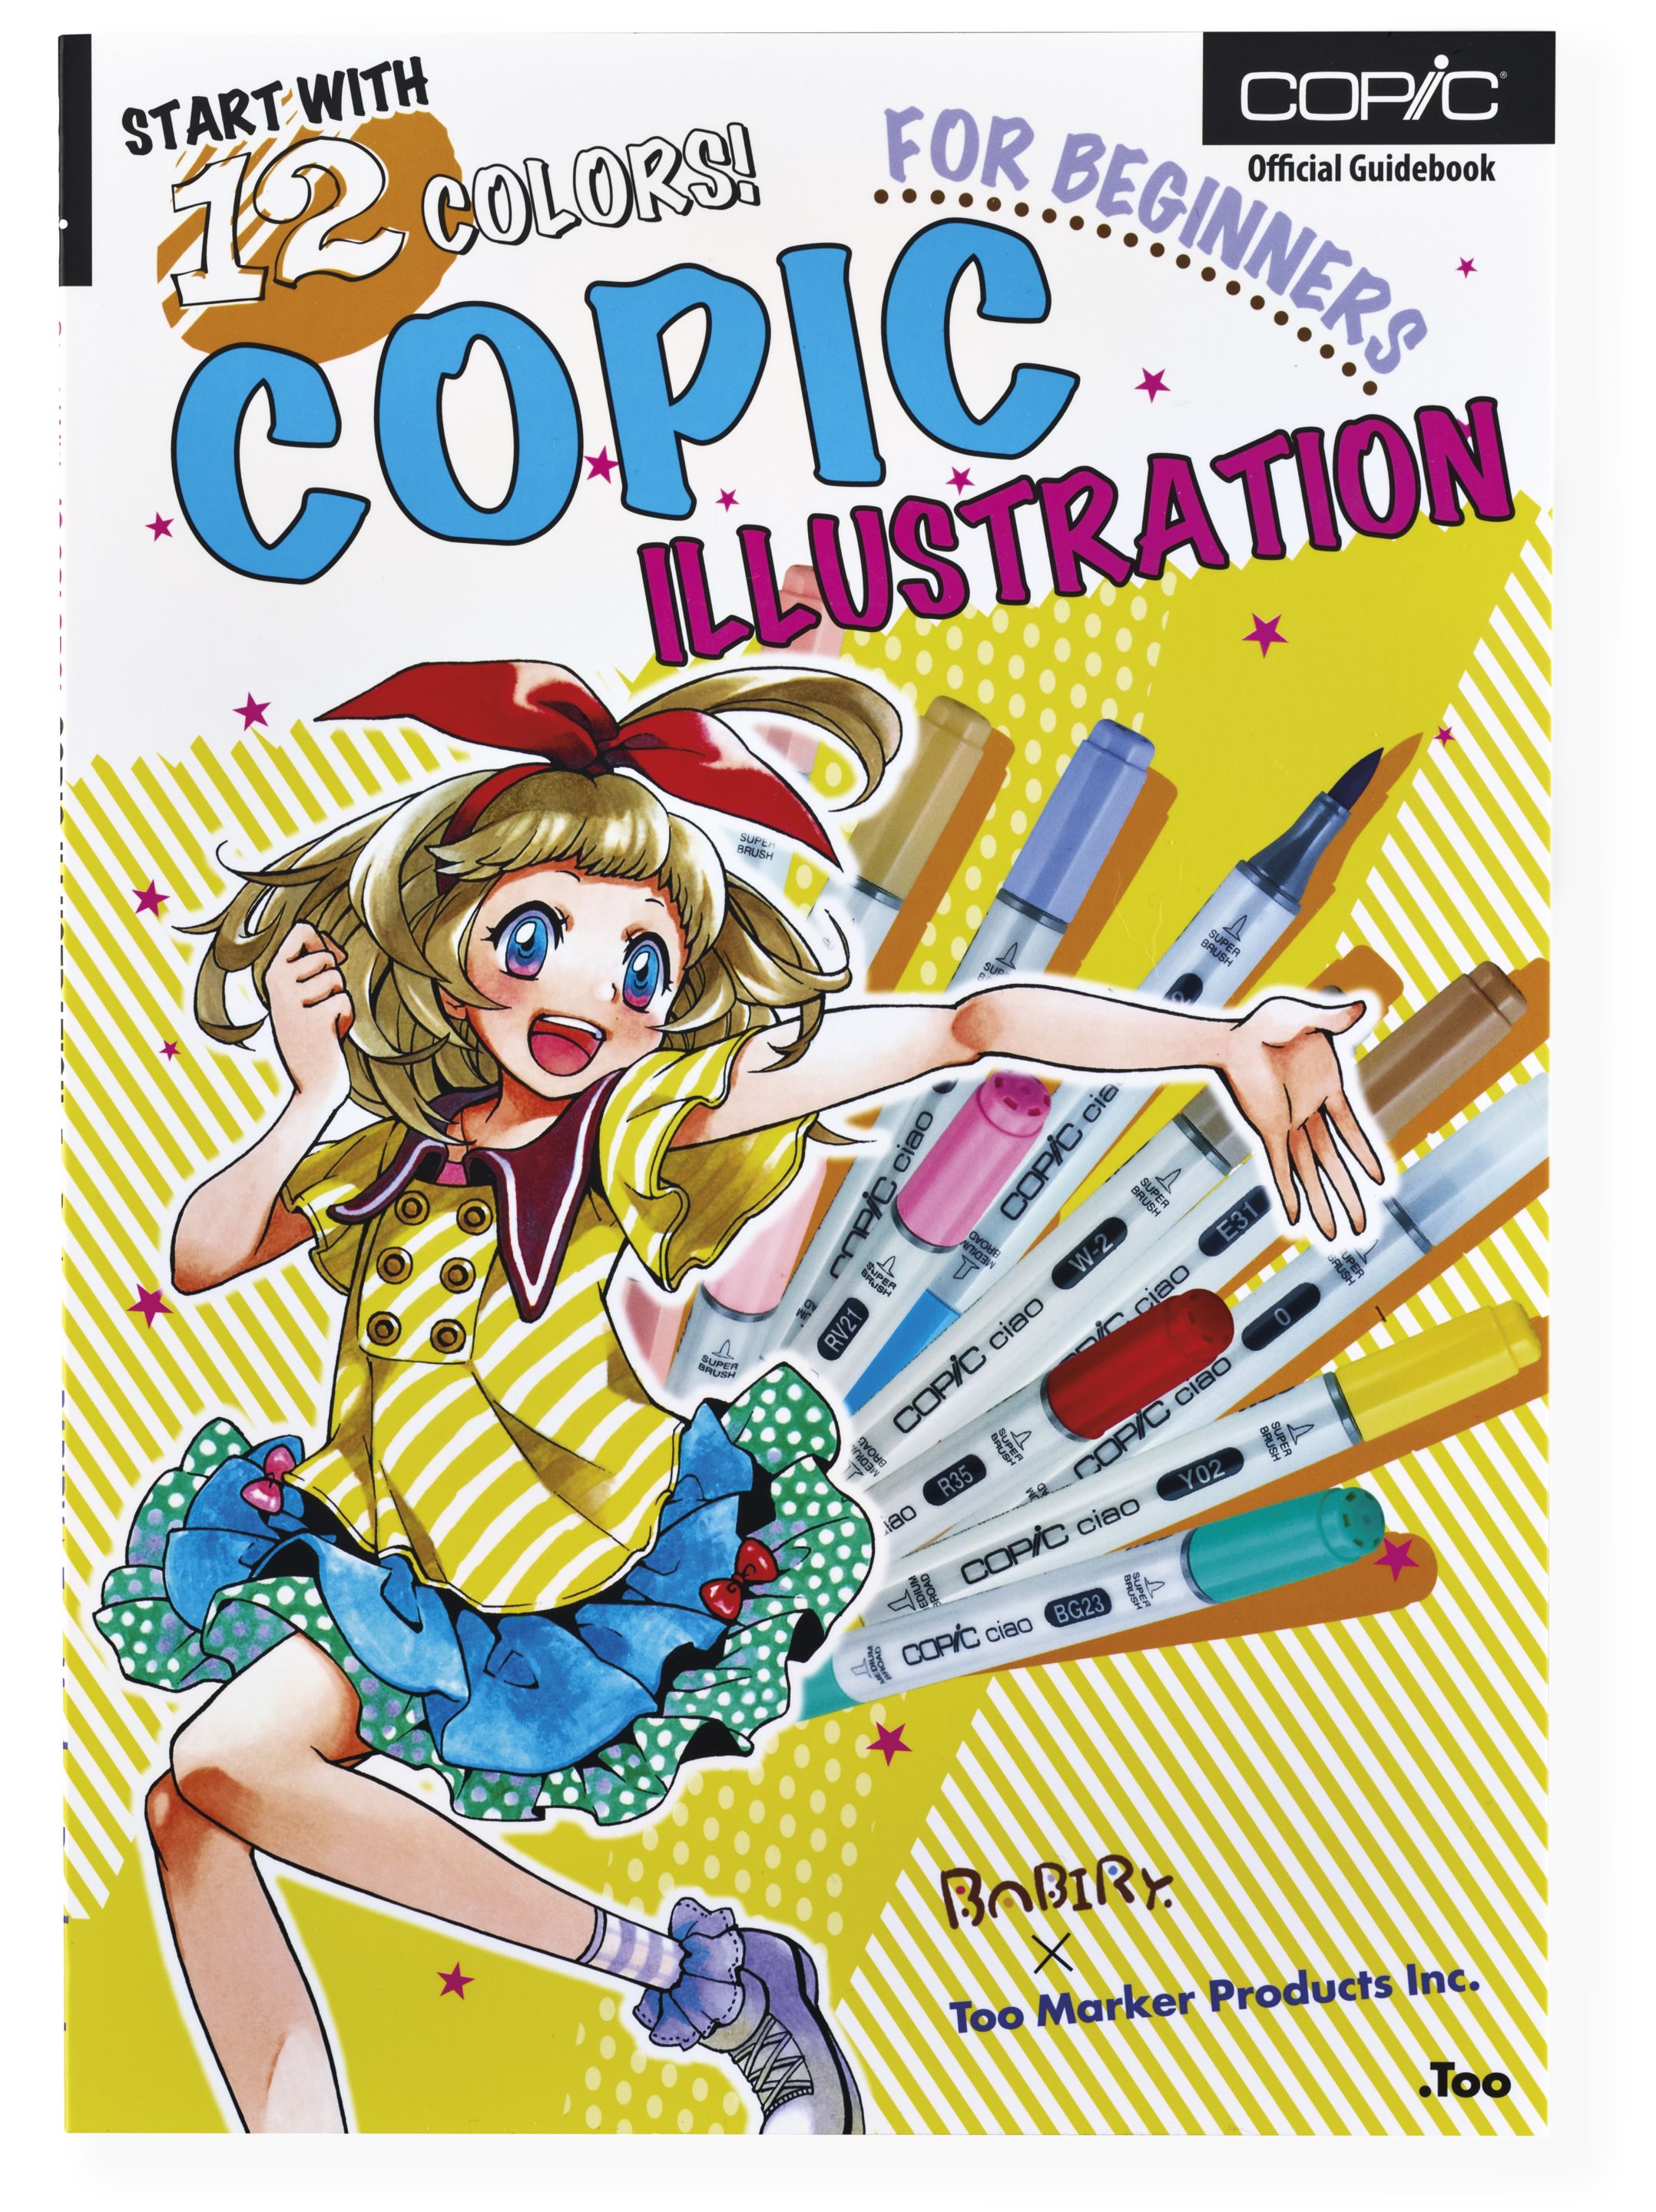 Copic Ciao 12er Set mit Copic Illustration Book, englisch transotype  (english)